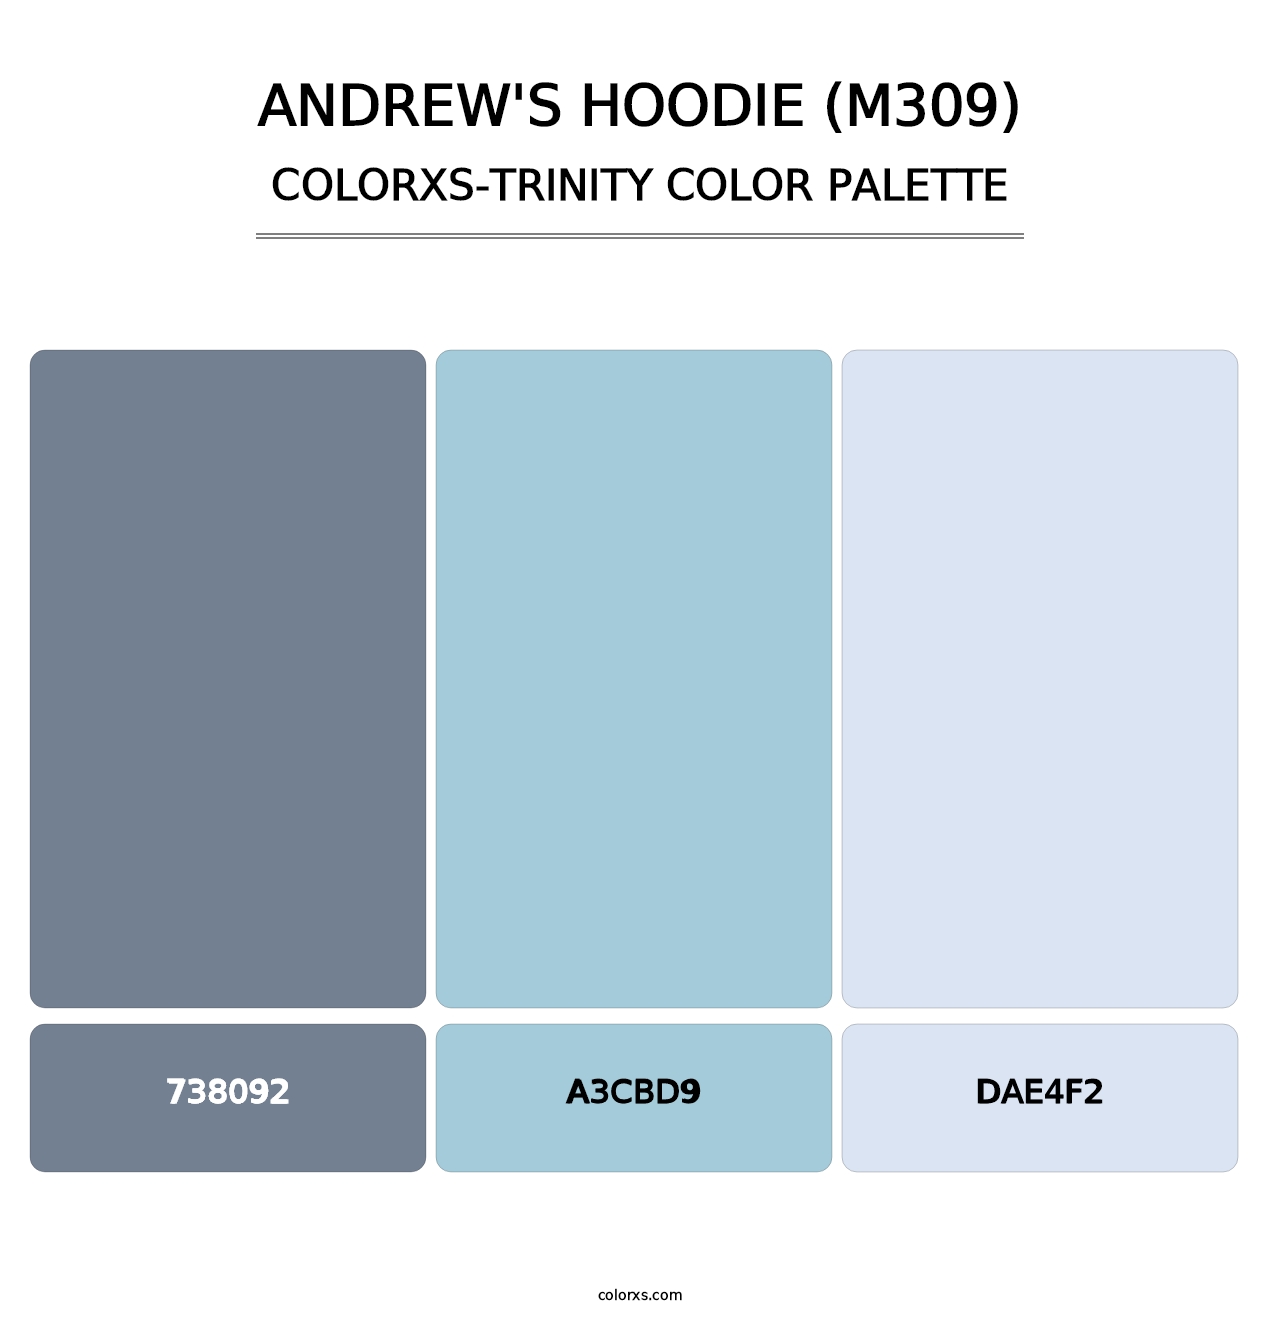 Andrew's Hoodie (M309) - Colorxs Trinity Palette